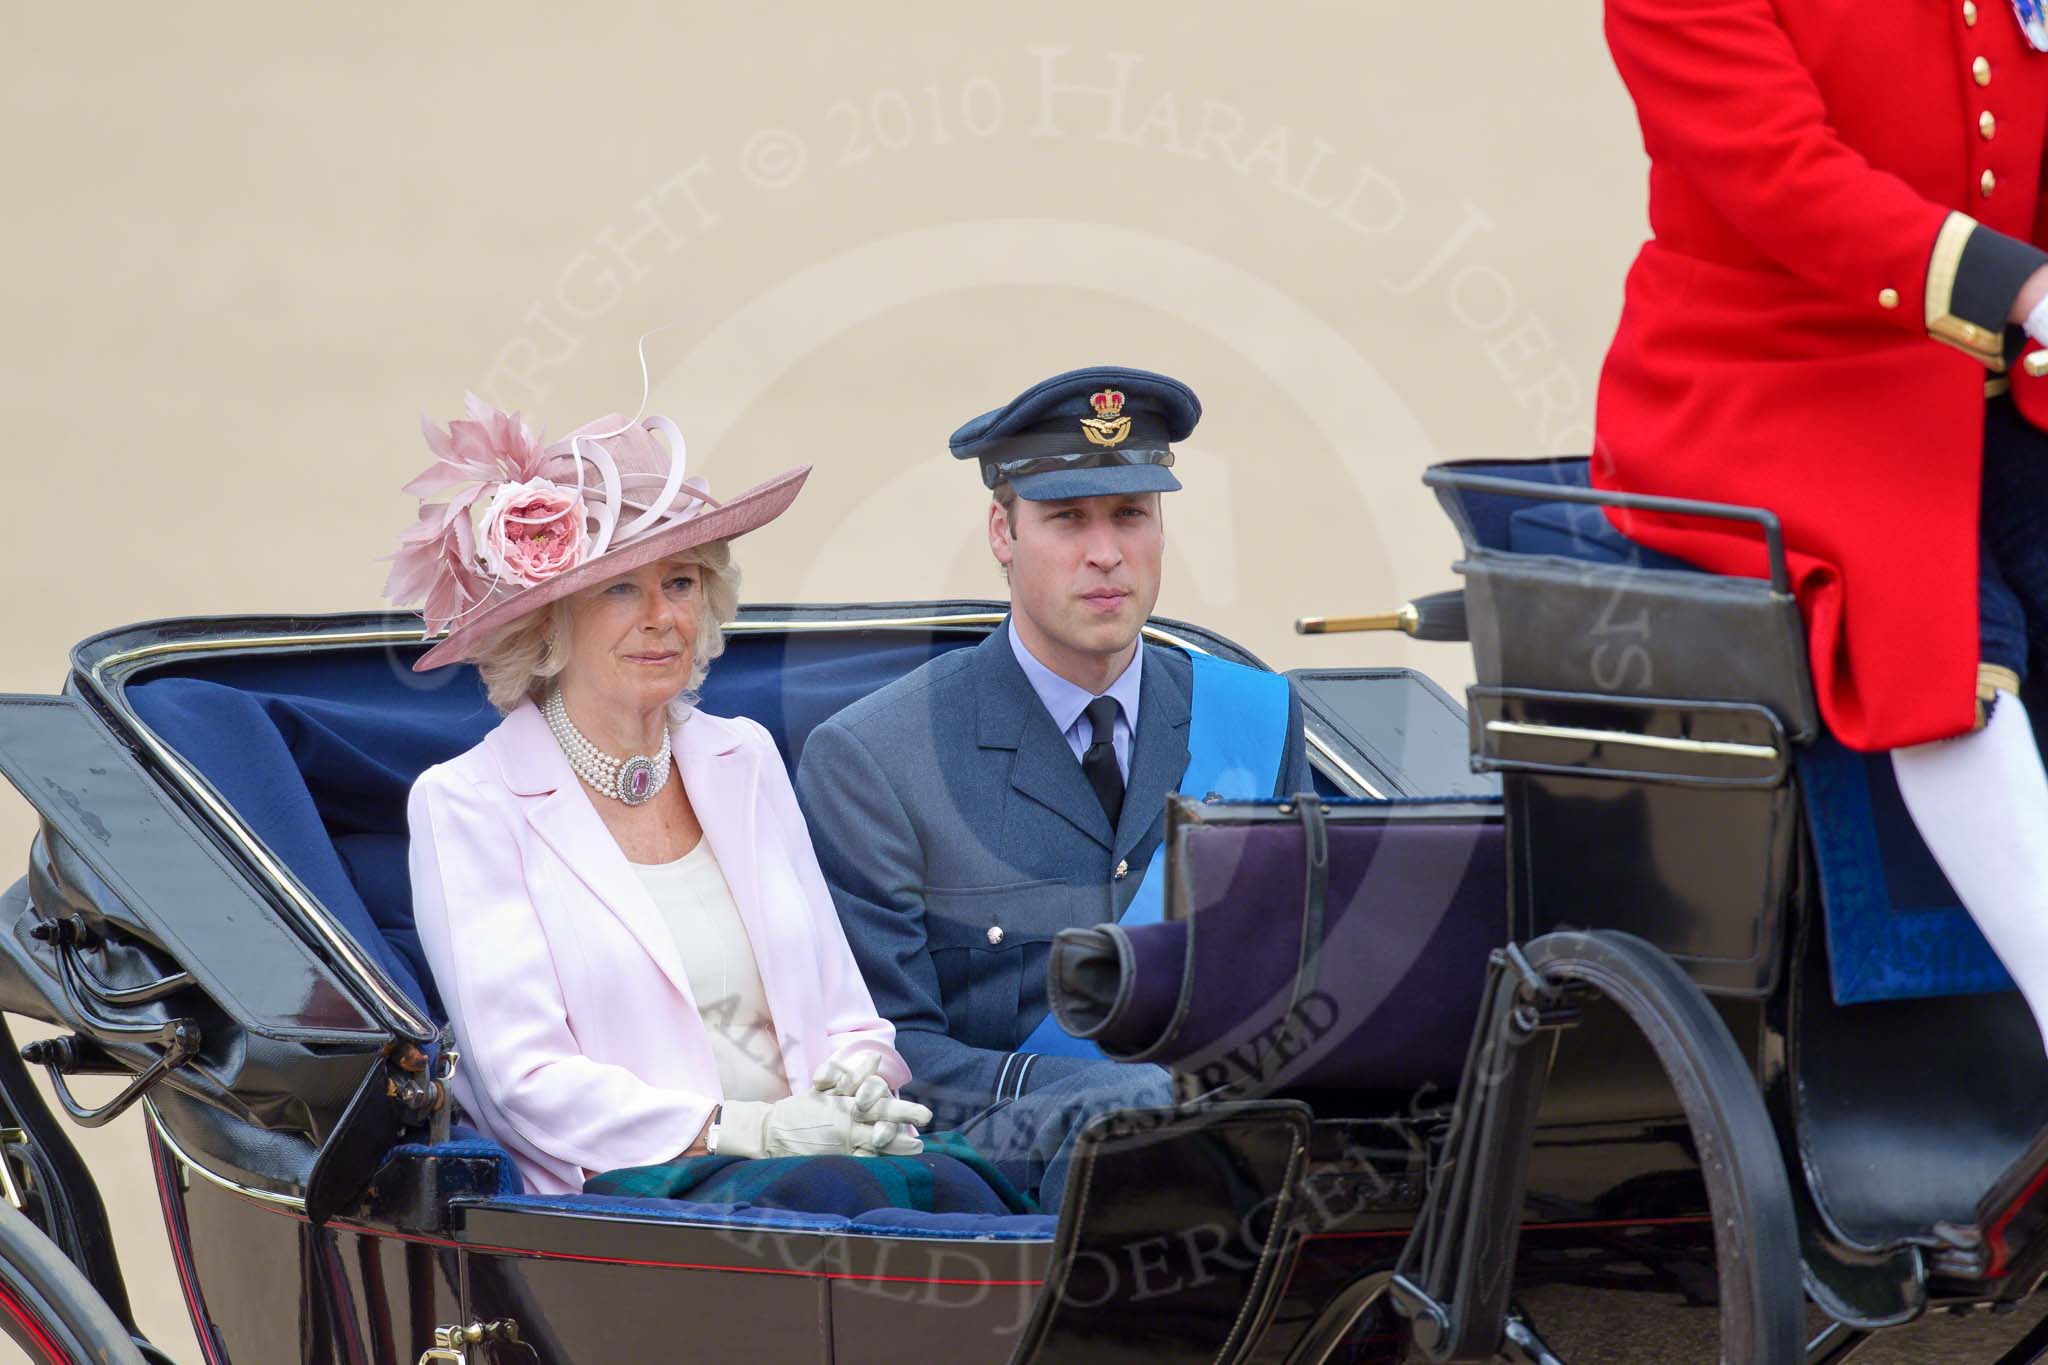 Trooping the Colour 2010: Prince William elser son elder son of Charles, Prince of Wales, and Diana, Princess of Wales, and grandson of Queen Elizabeth II and Prince Philip, Duke of Edinburgh, and The Duchess of Cornwall,Camilla Parker Bowles, the wife of Prince Charles, in their barouche on the way from Buckingham Palace to Horse Guards Building, where they are going to watch the parade from the General Major's office, the room that was once used by the Duke of Wellington as his office..
Horse Guards Parade, Westminster,
London SW1,
Greater London,
United Kingdom,
on 12 June 2010 at 10:50, image #37